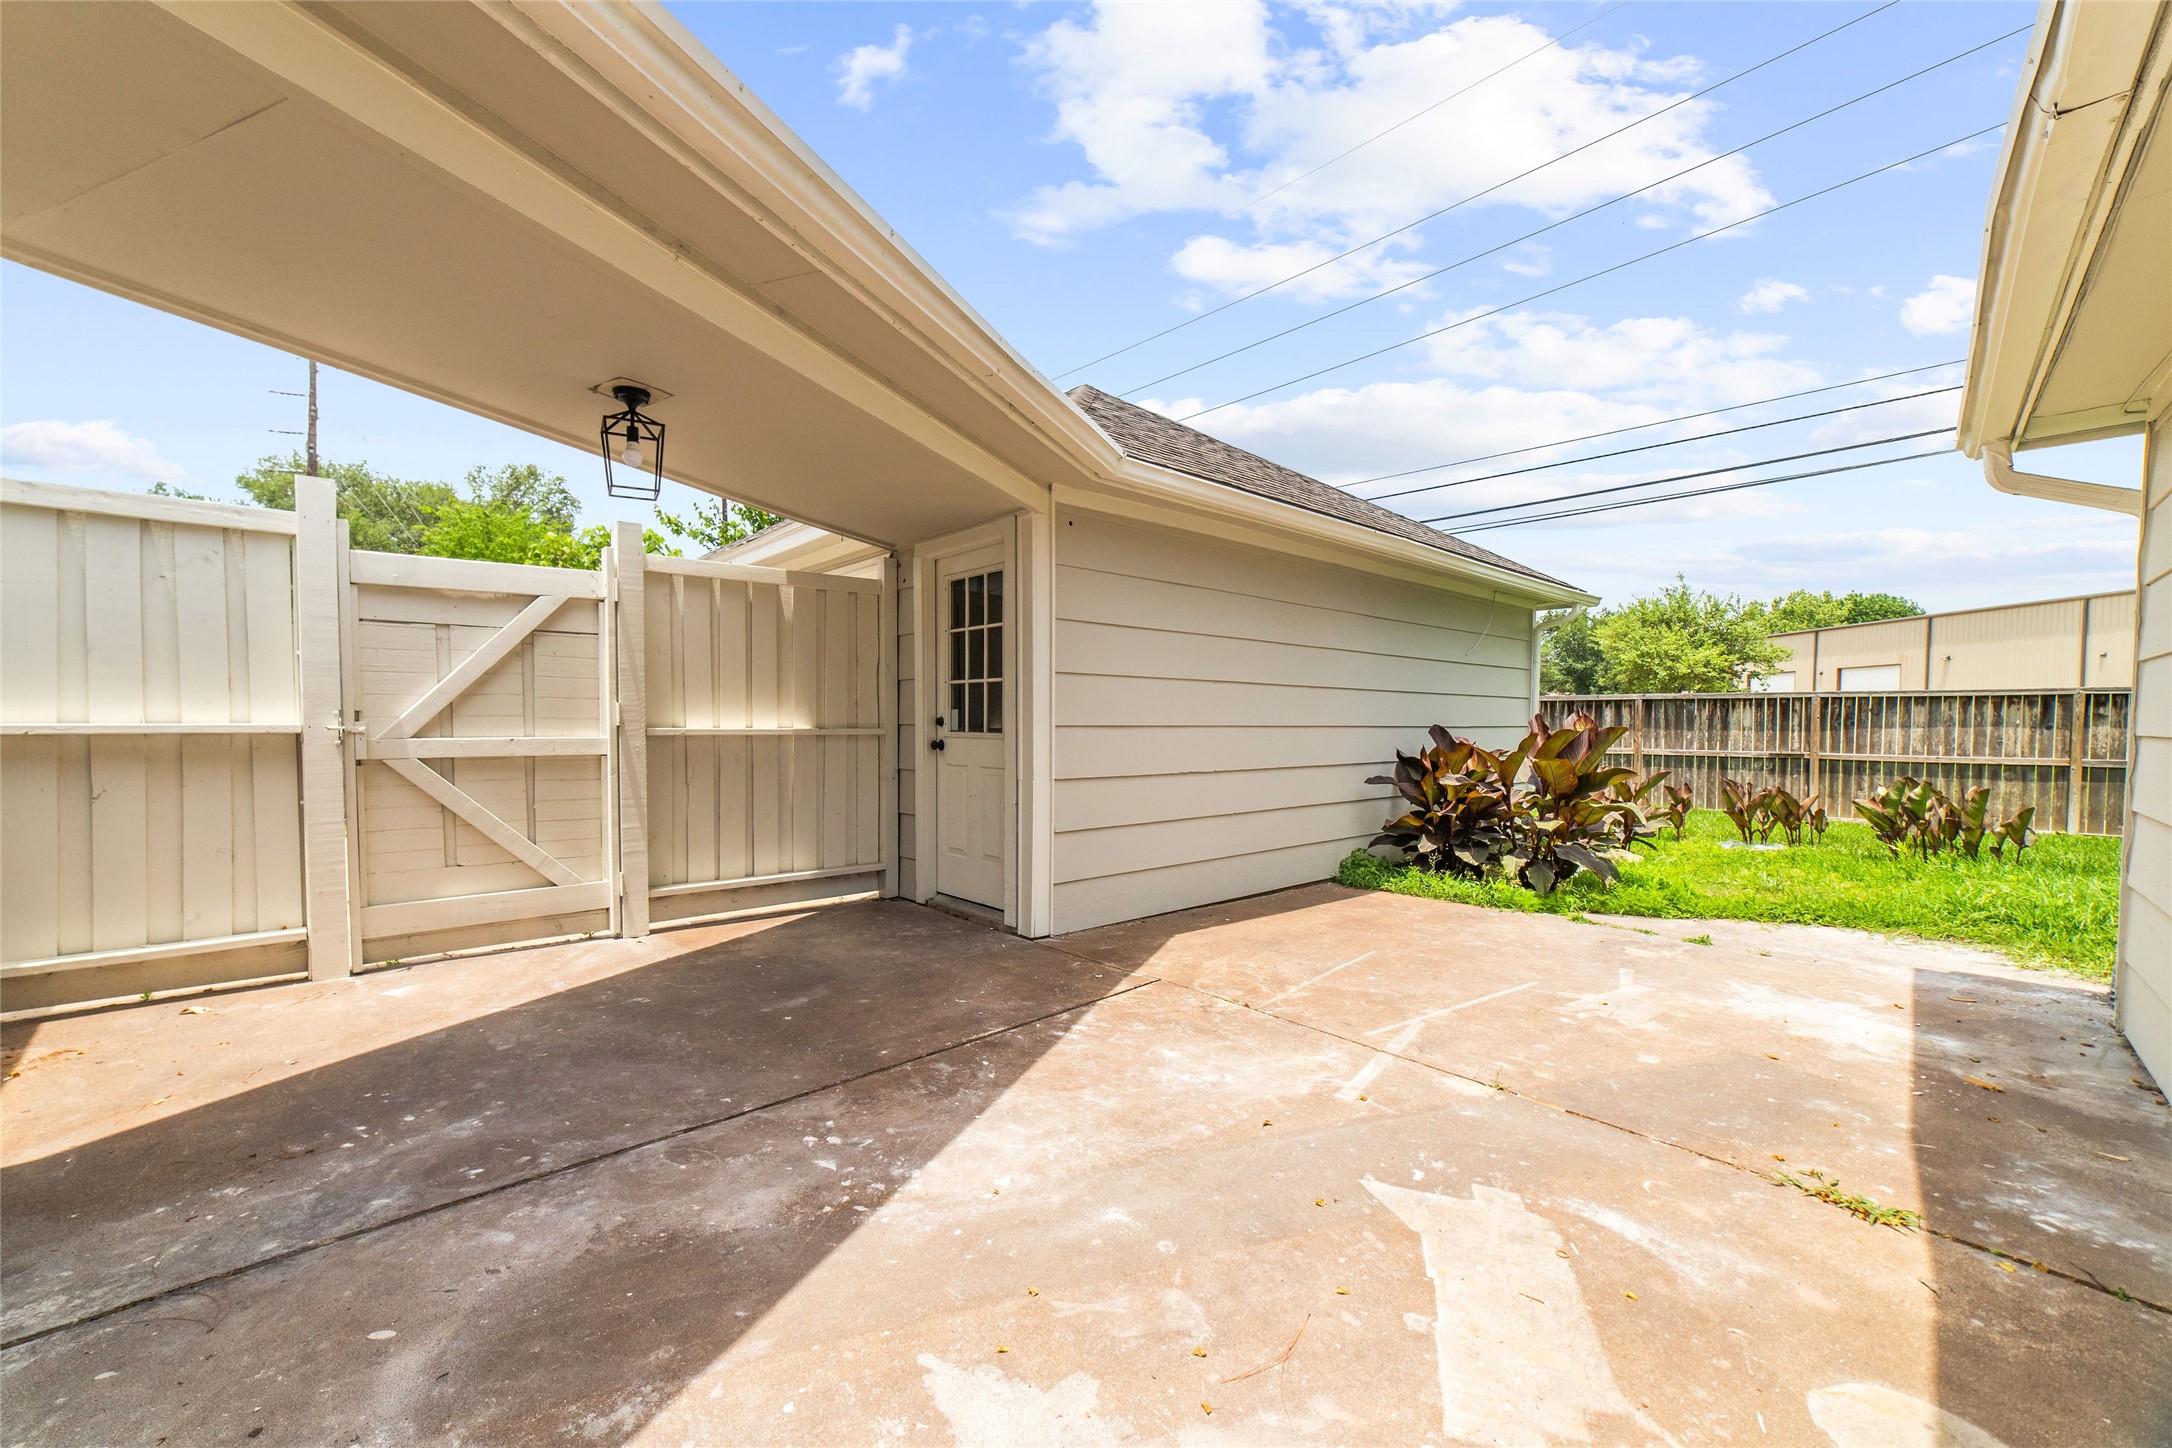 Detached garage entrance - If you have additional questions regarding 22506 Wetherburn Lane  in Katy or would like to tour the property with us call 800-660-1022 and reference MLS# 96980135.